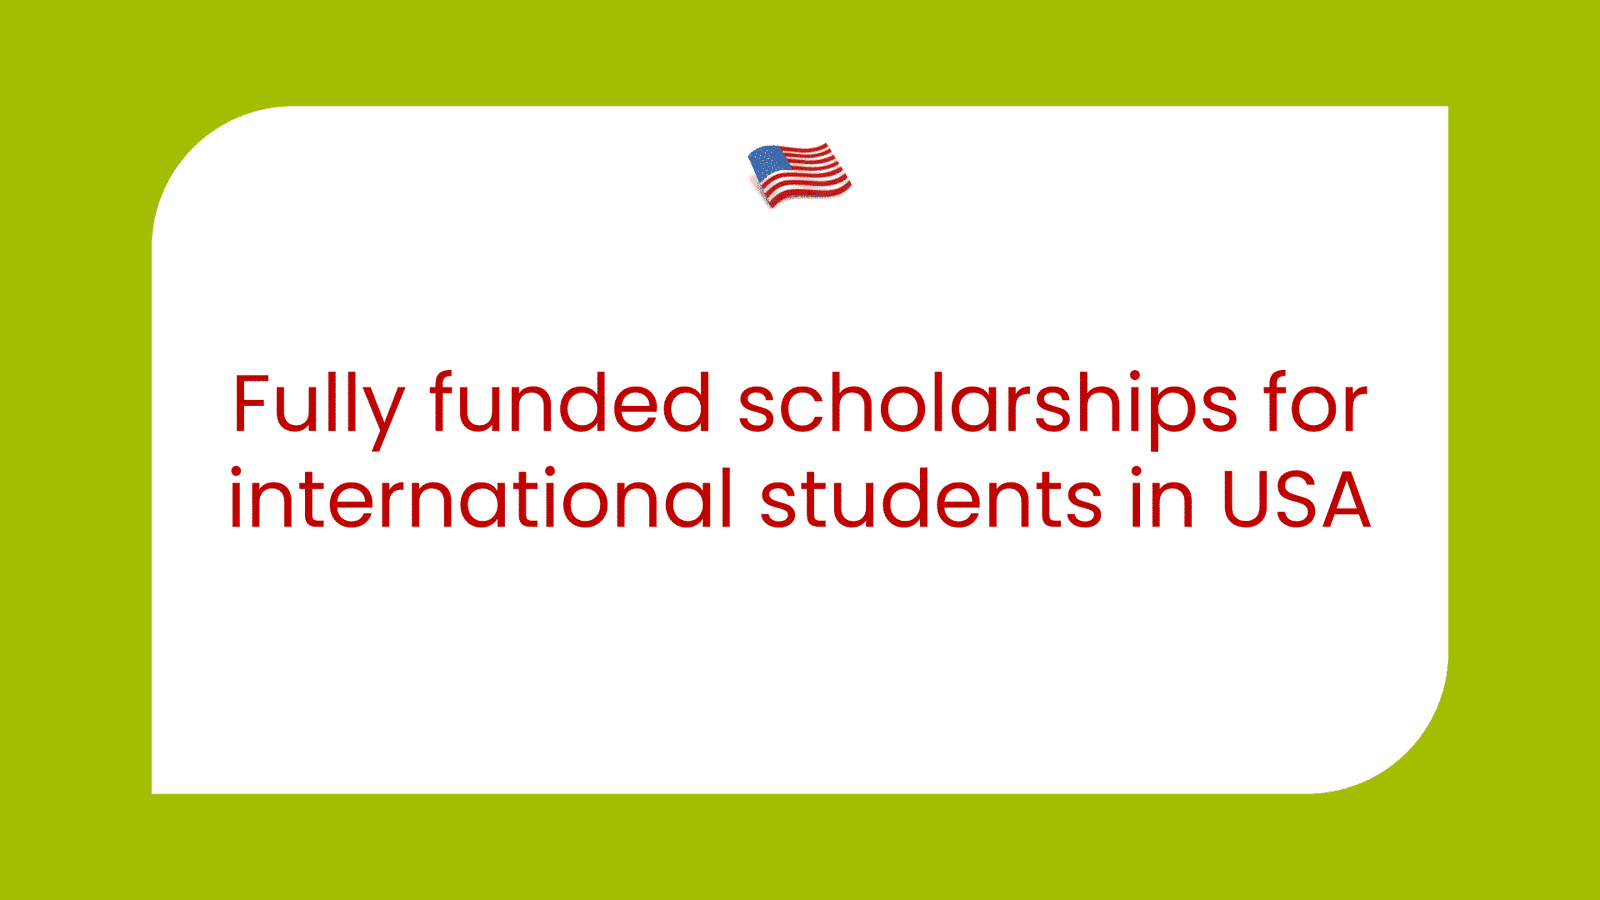 is phd fully funded in usa for international students